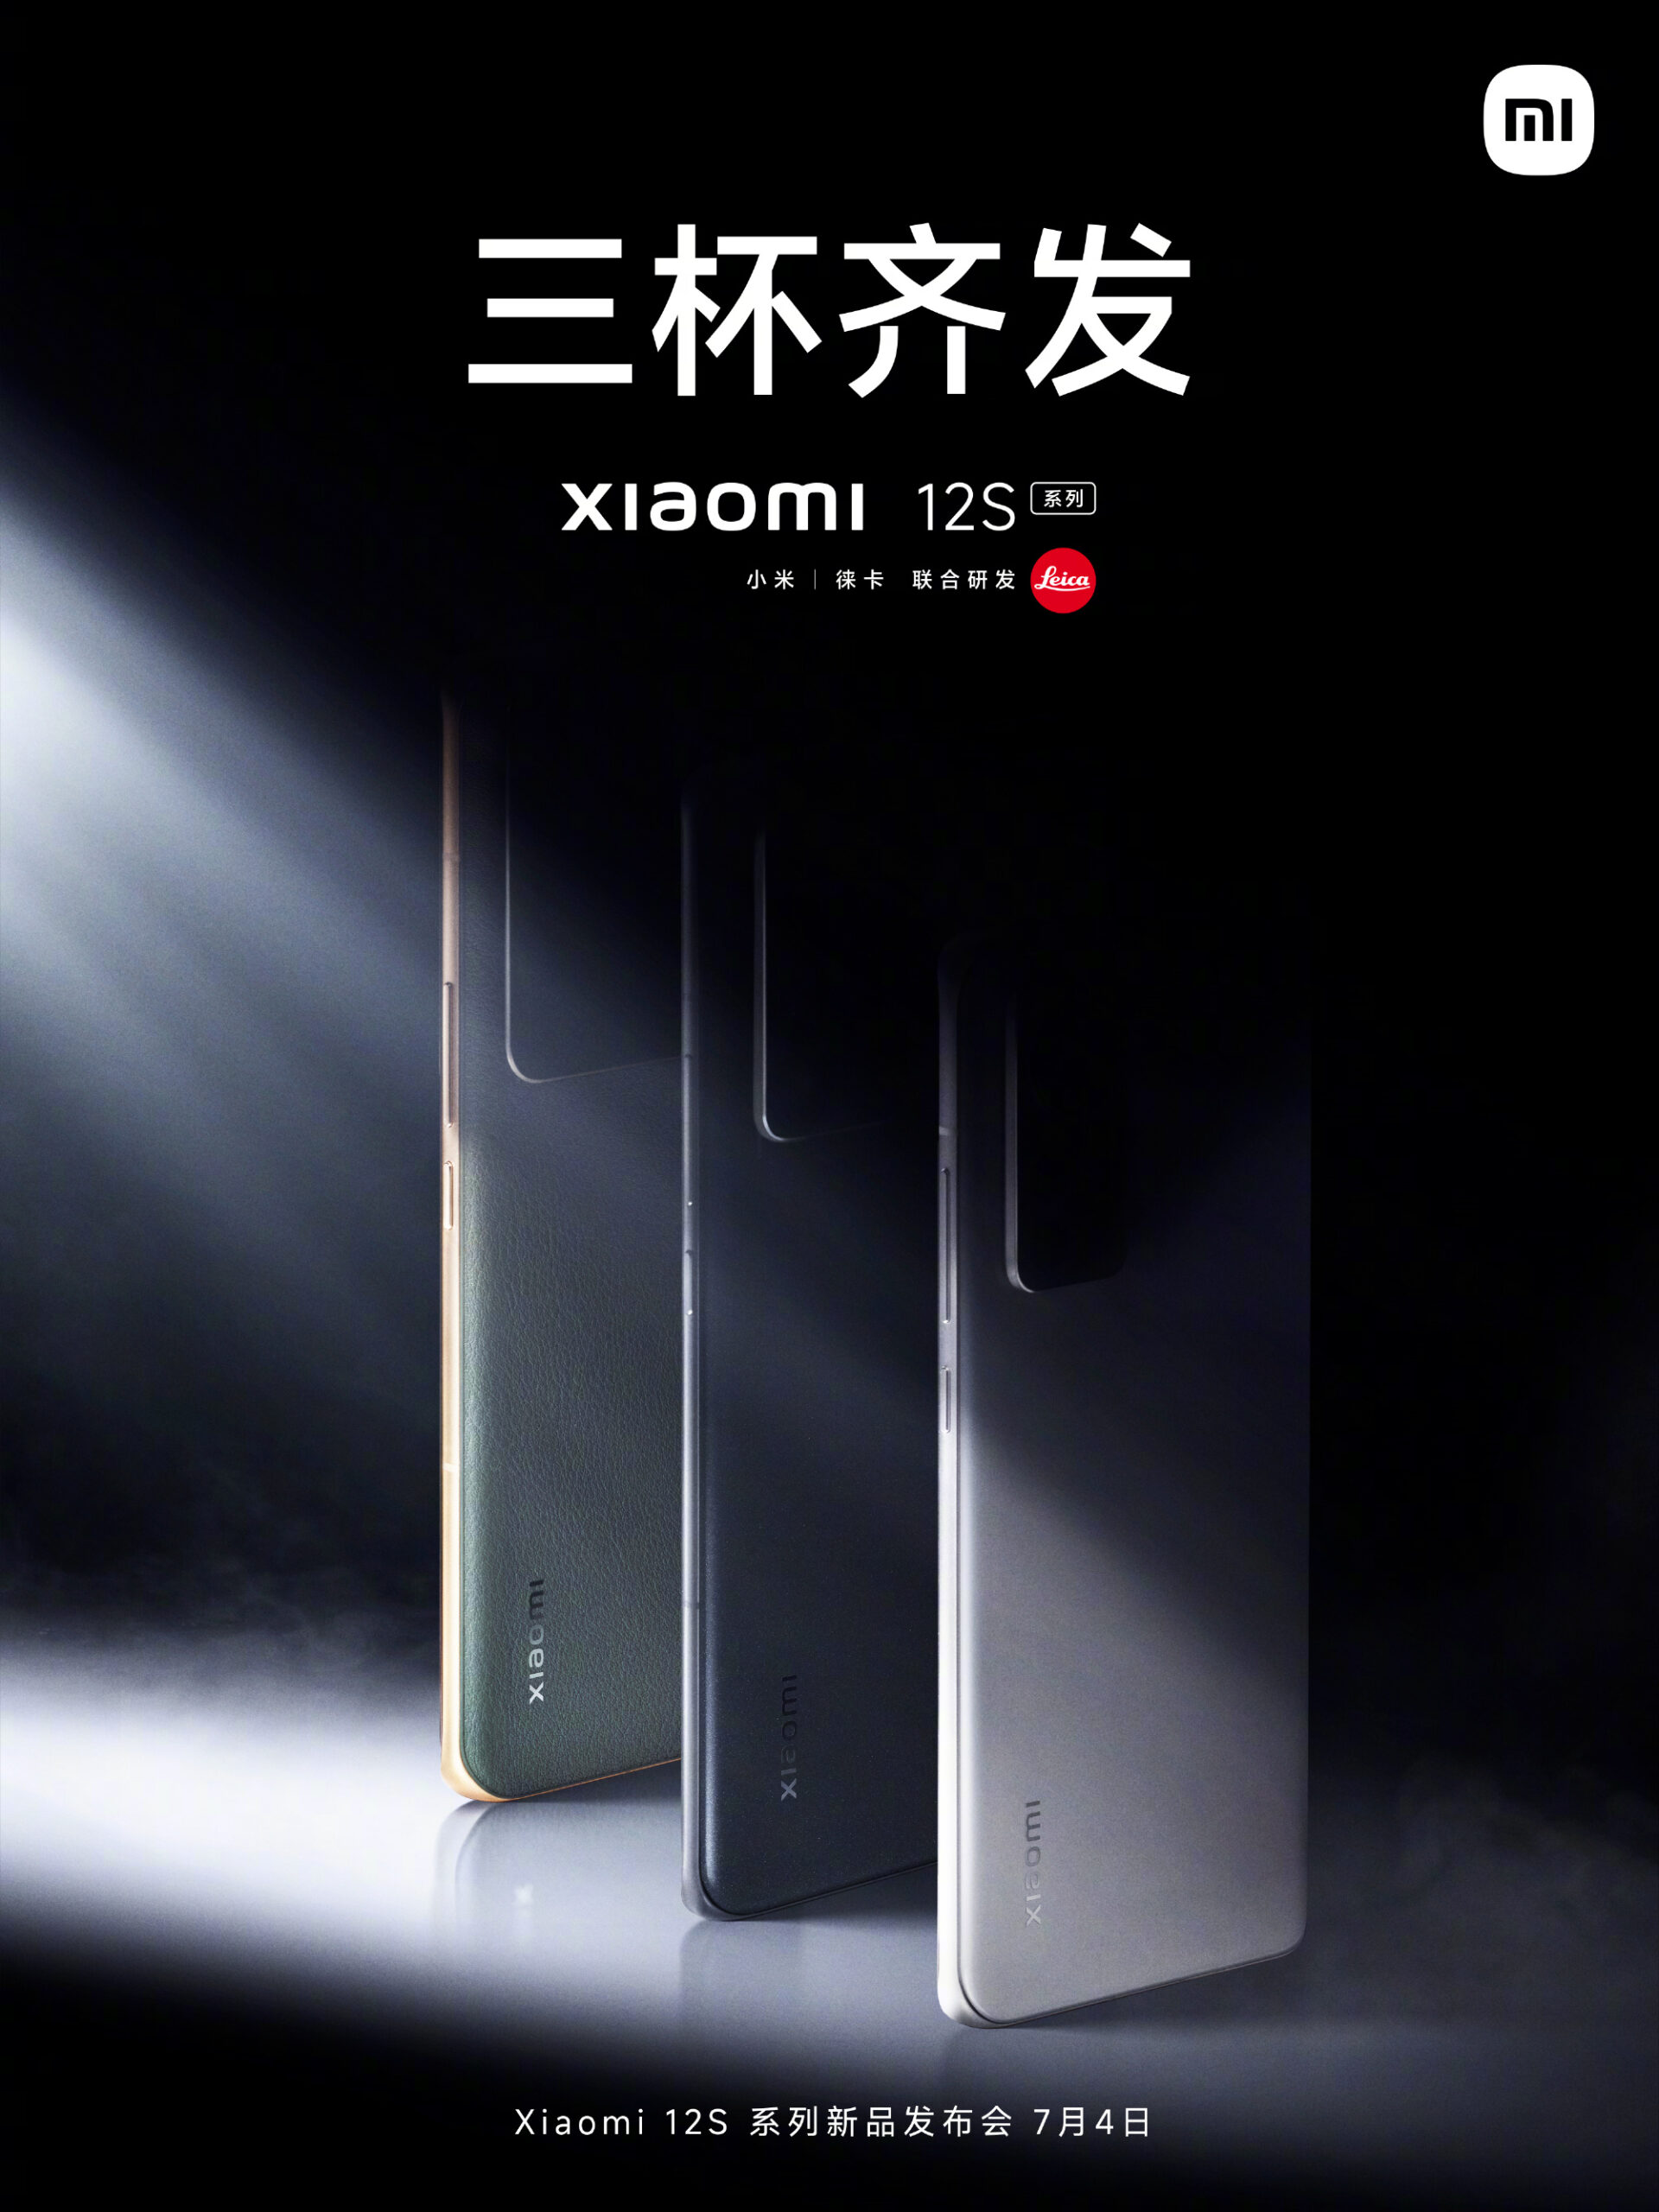 xiaomi 12s series poster 1 scaled